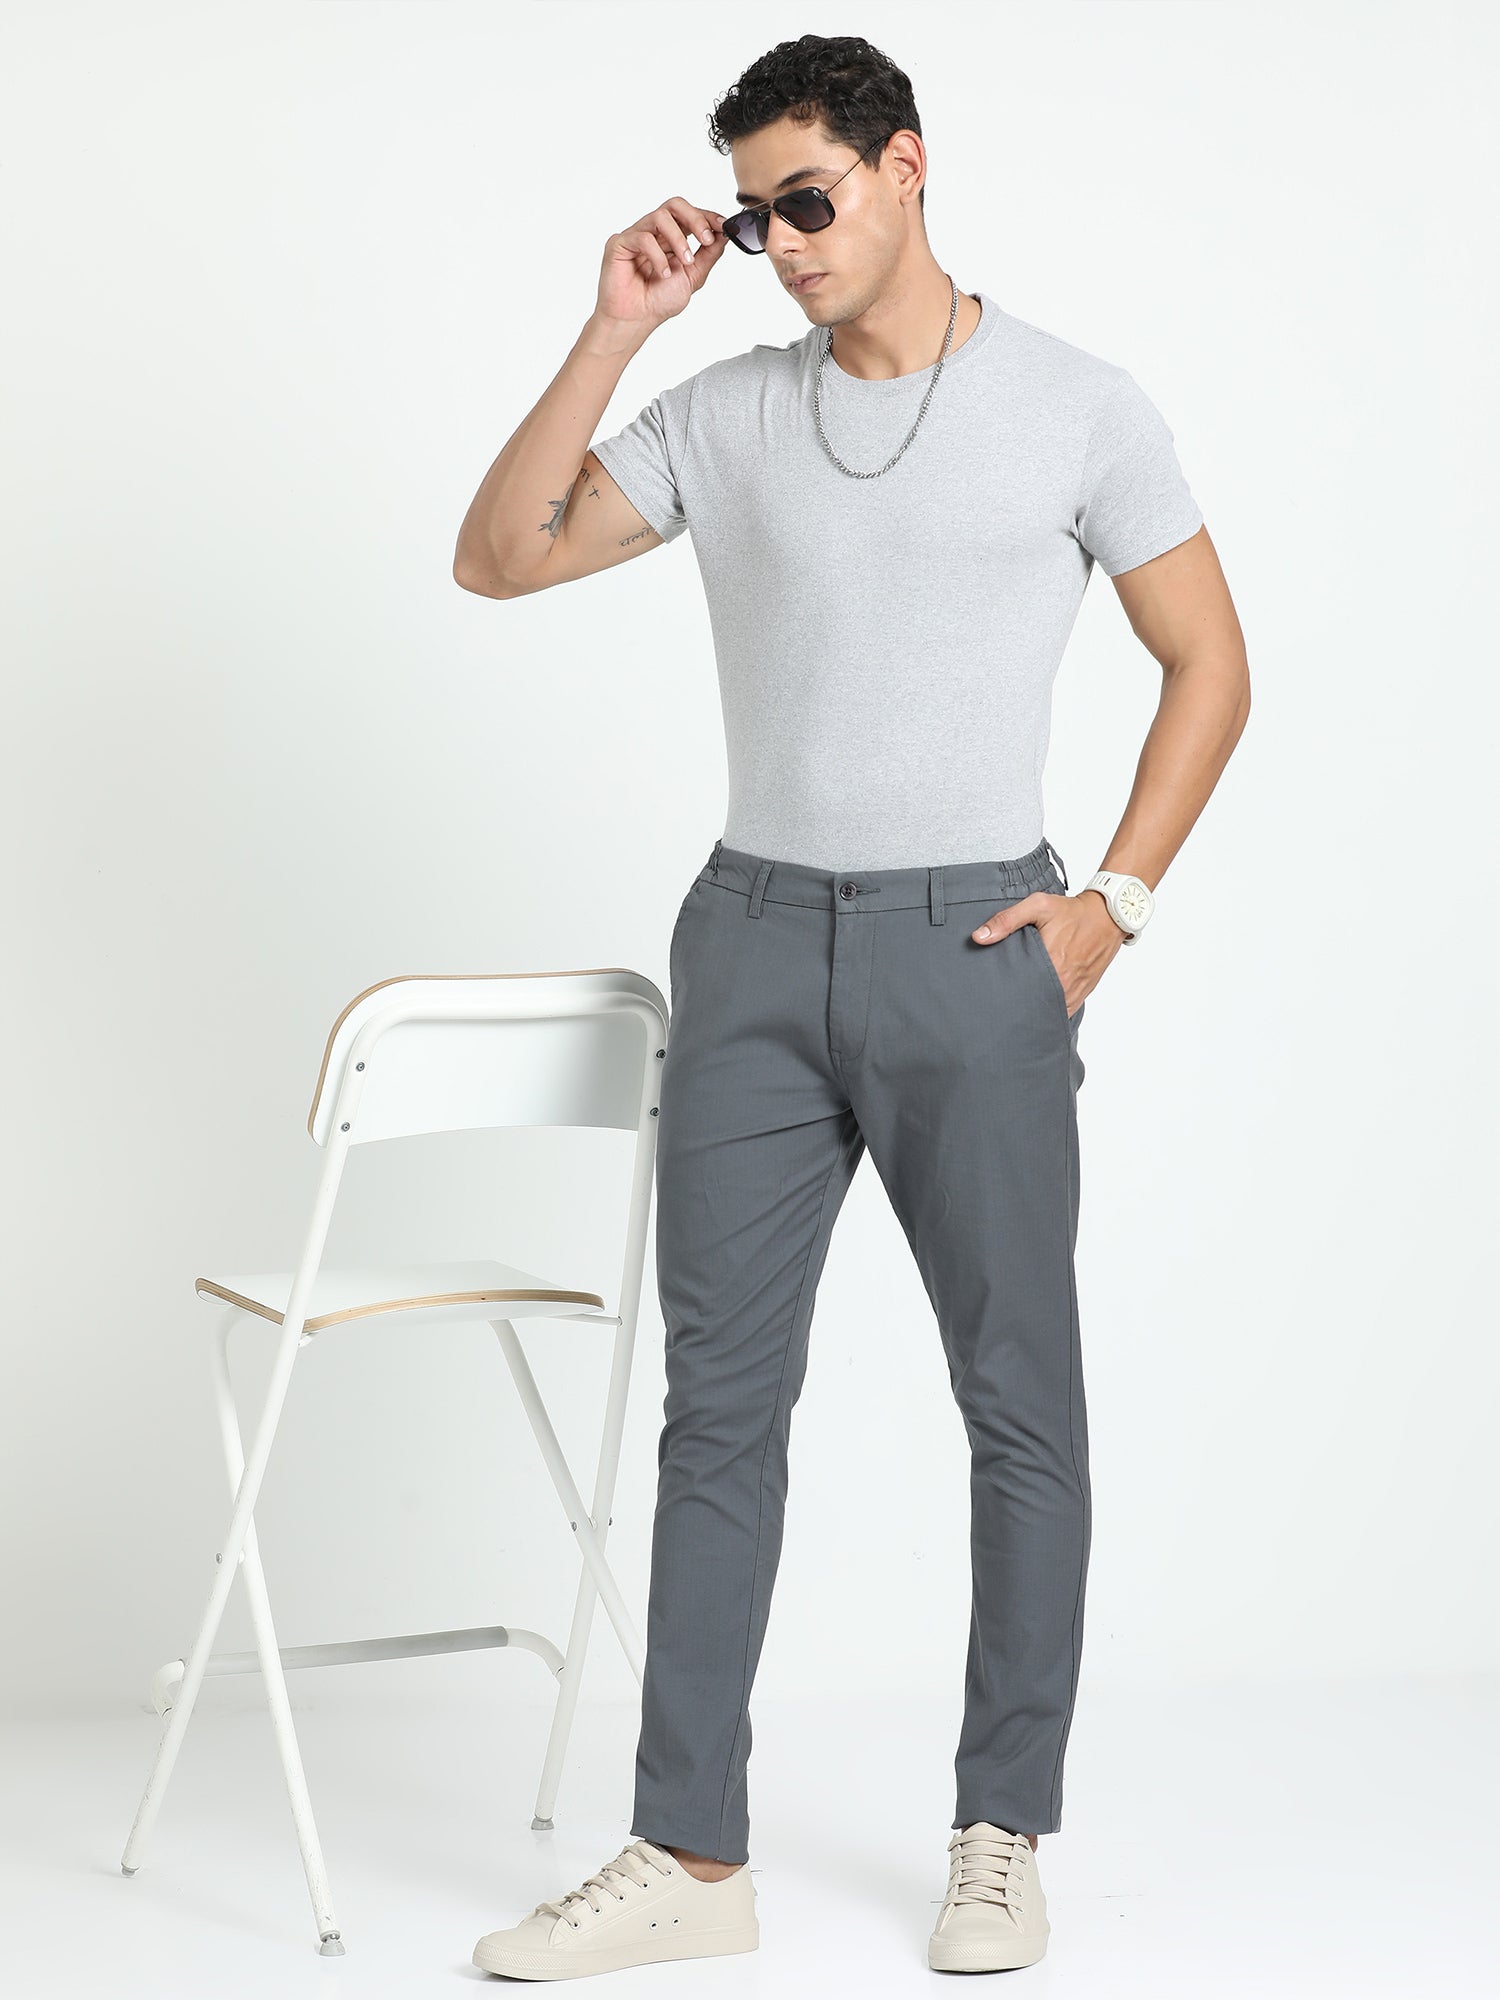 The Best-Fitting Pants for Your Build | Stitch Fix Men